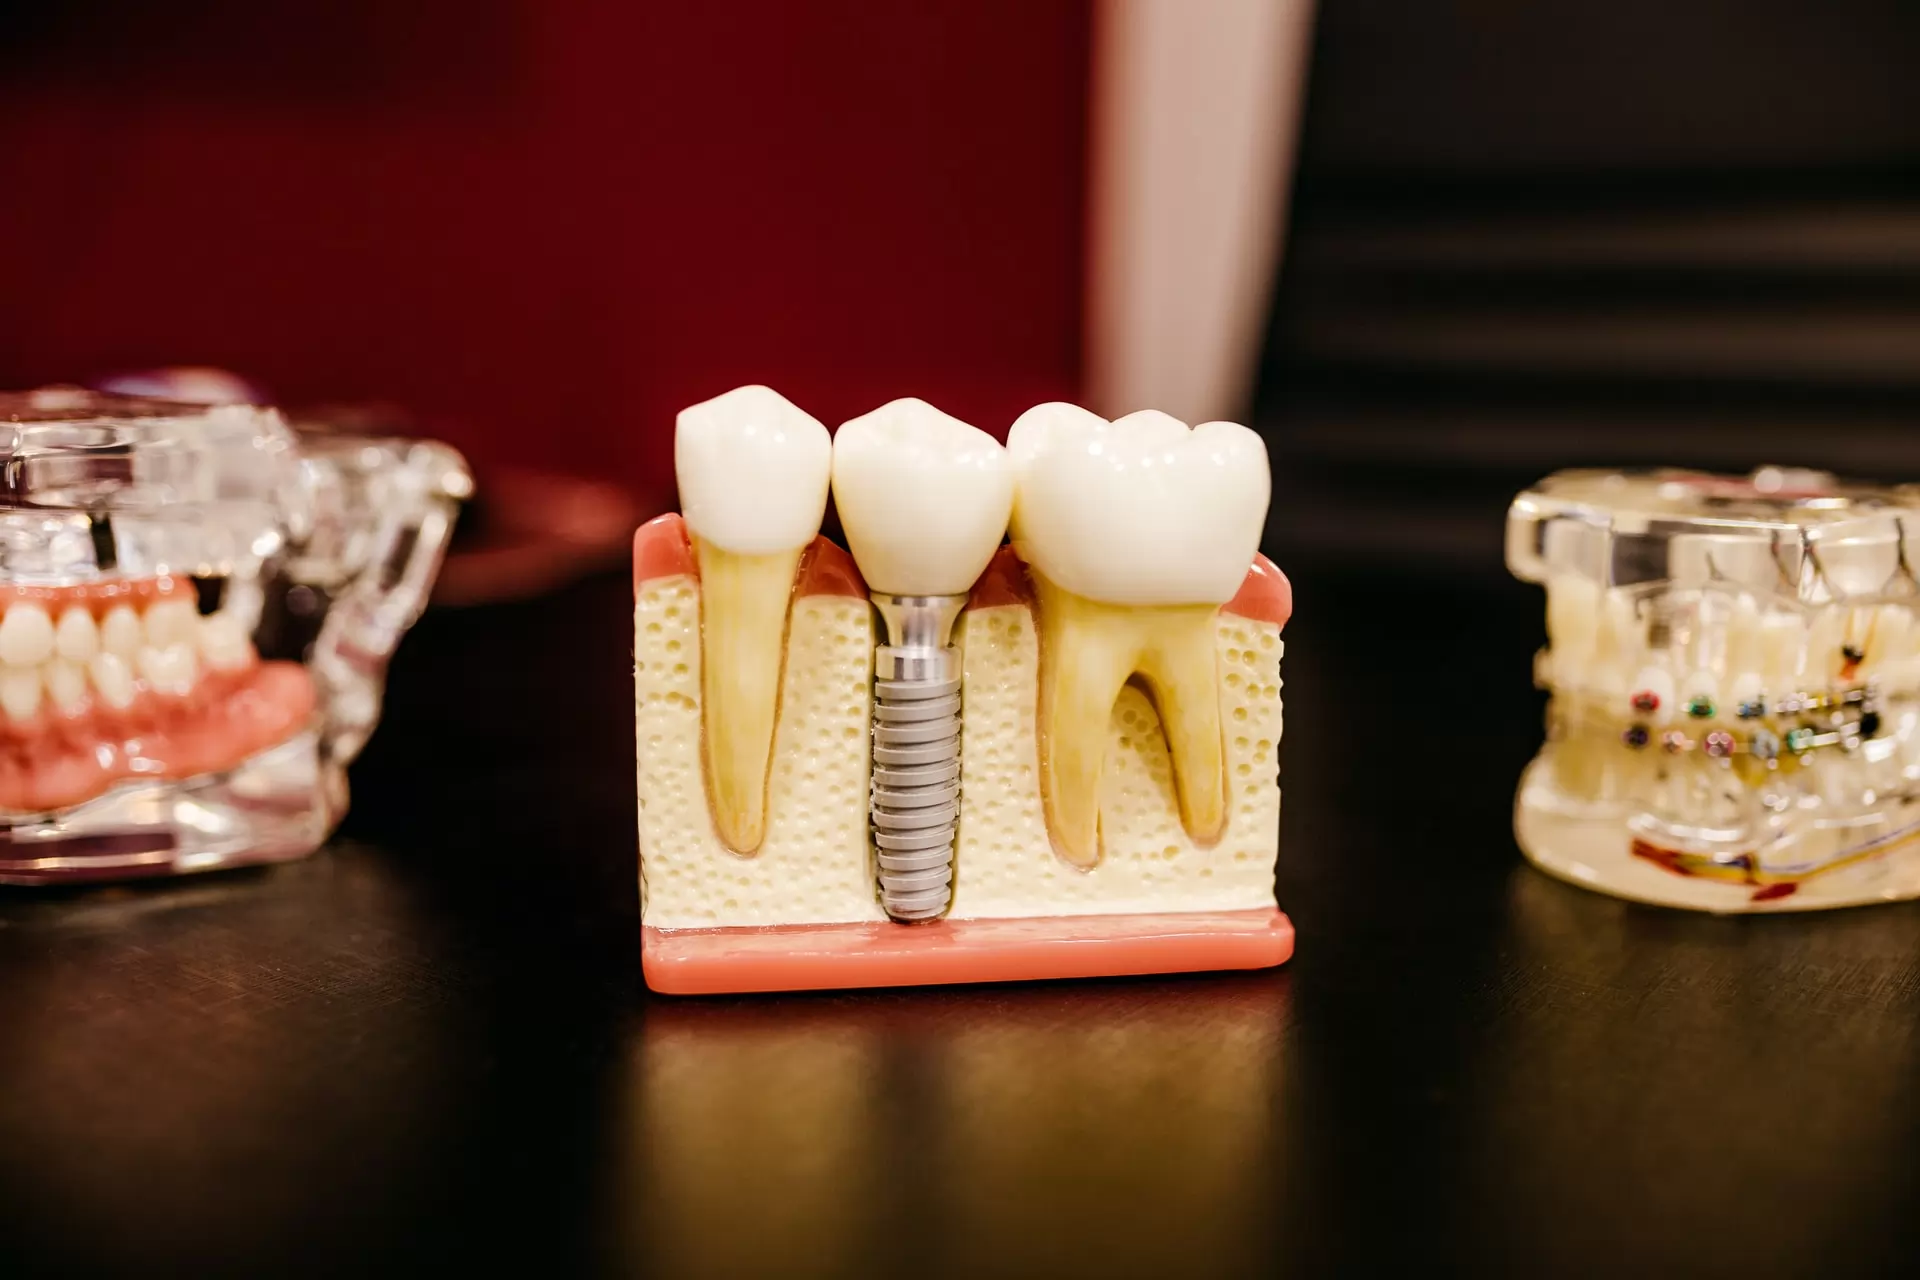 The market for dental implants and prostheses